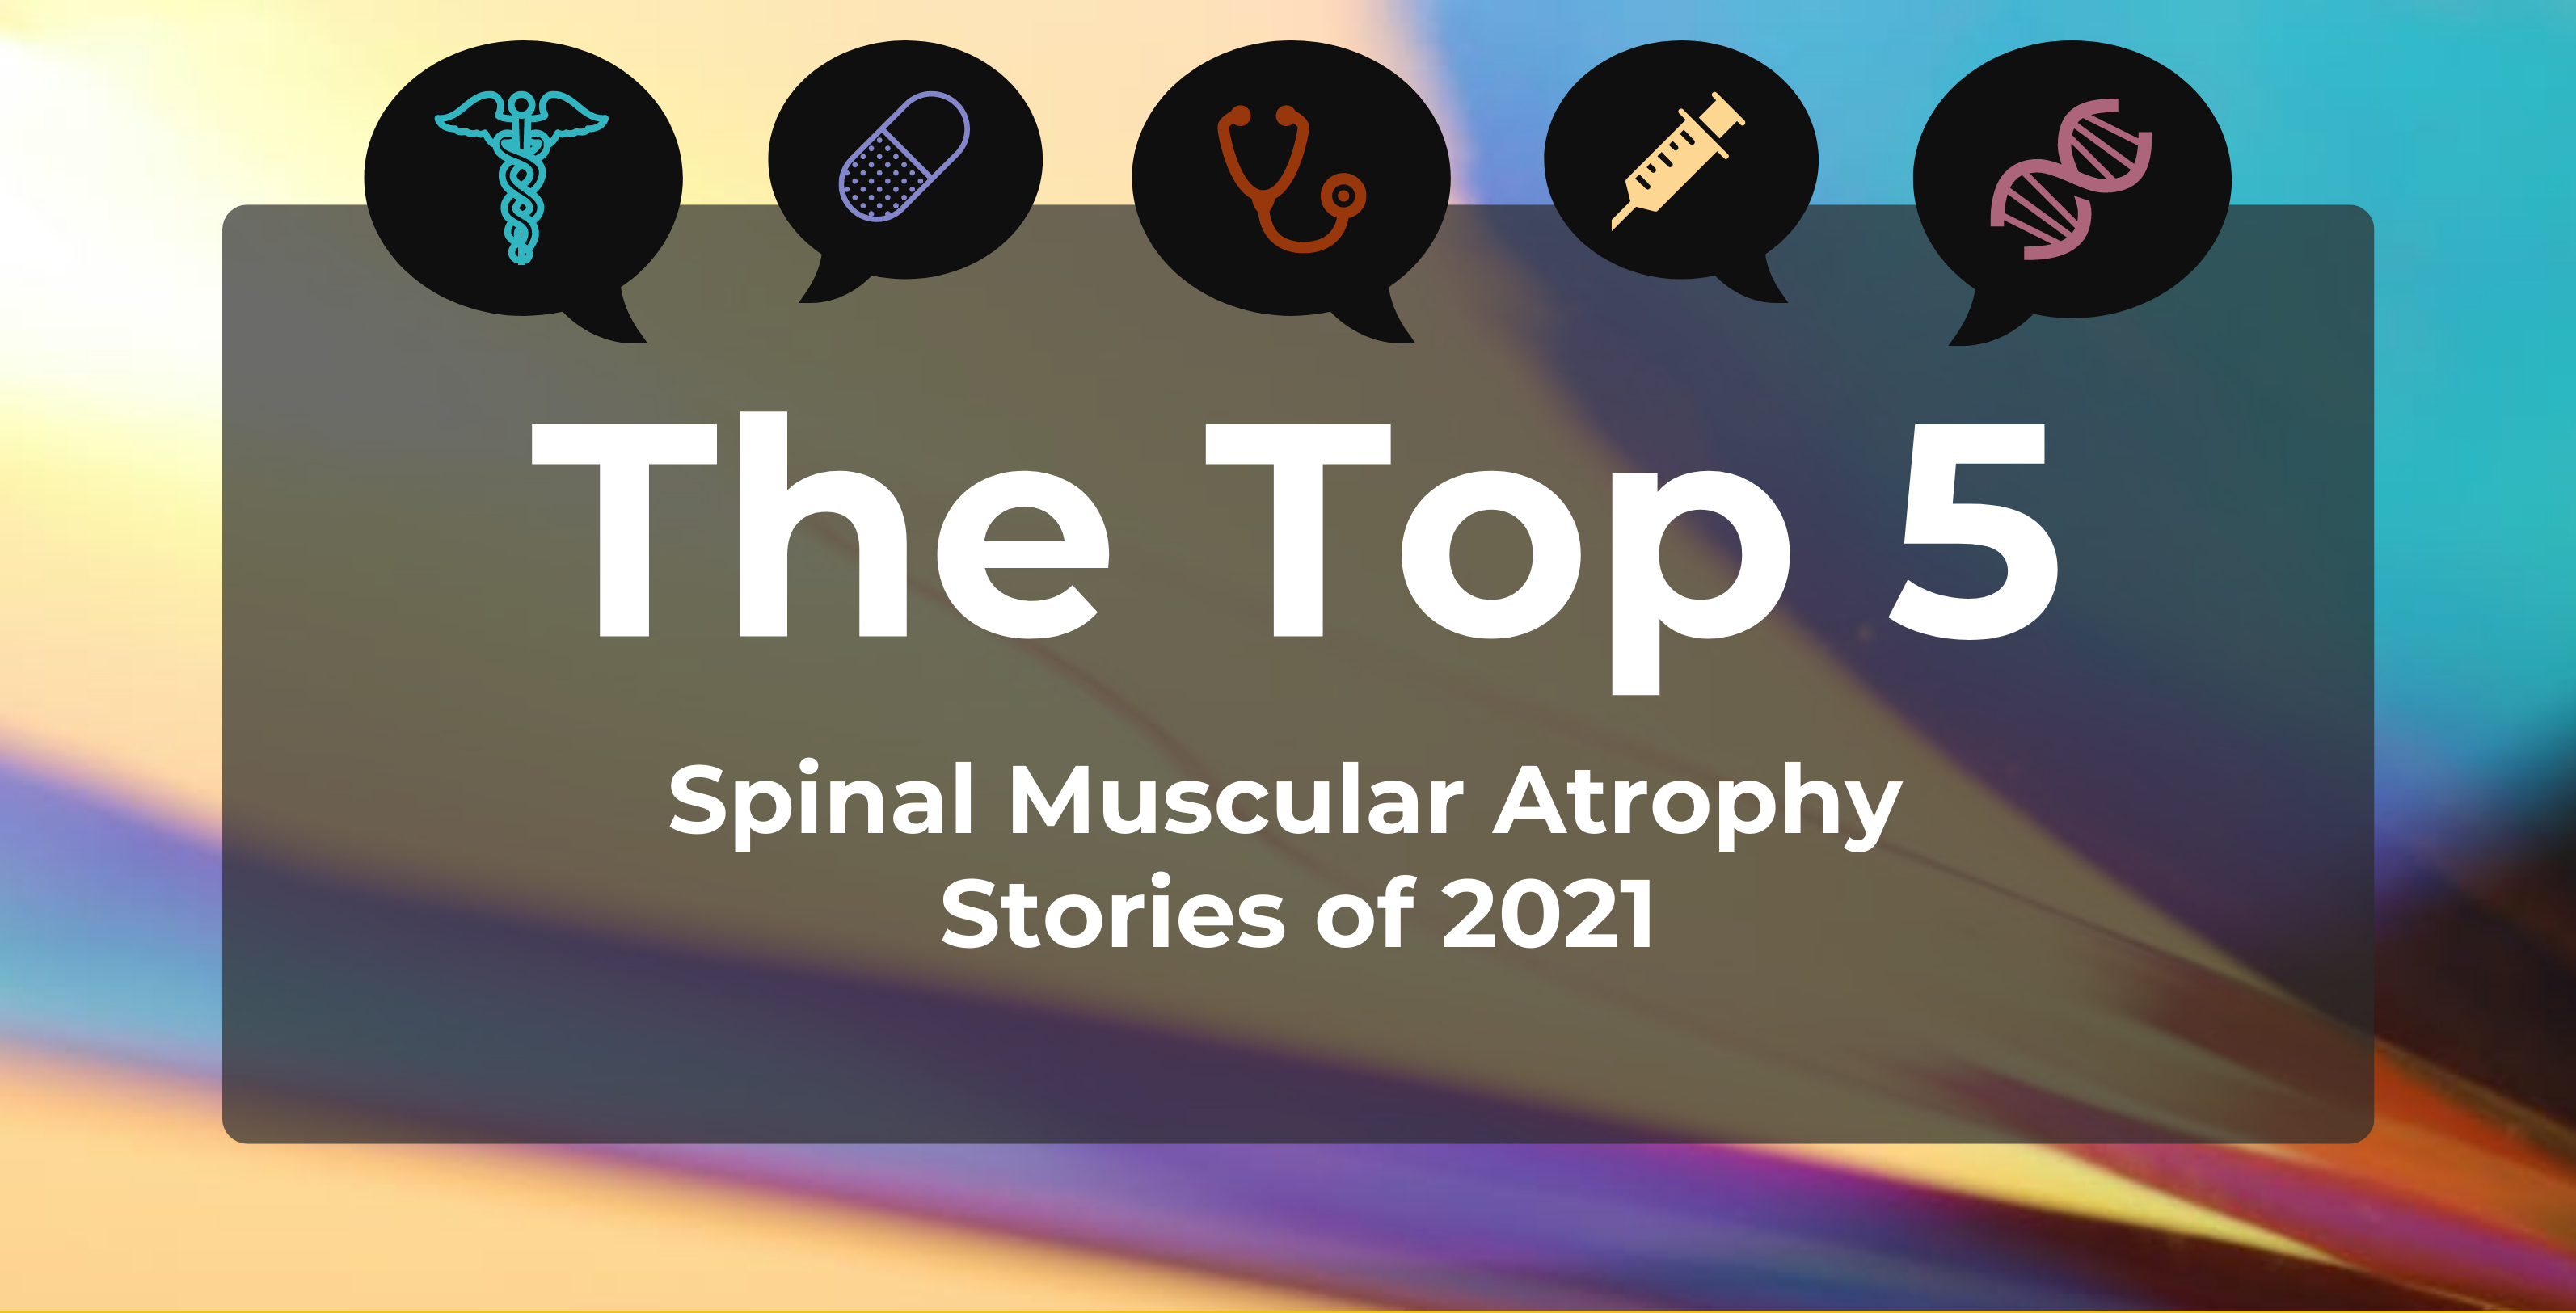 Top 5 Most-Read Spinal Muscular Atrophy Stories of 2021